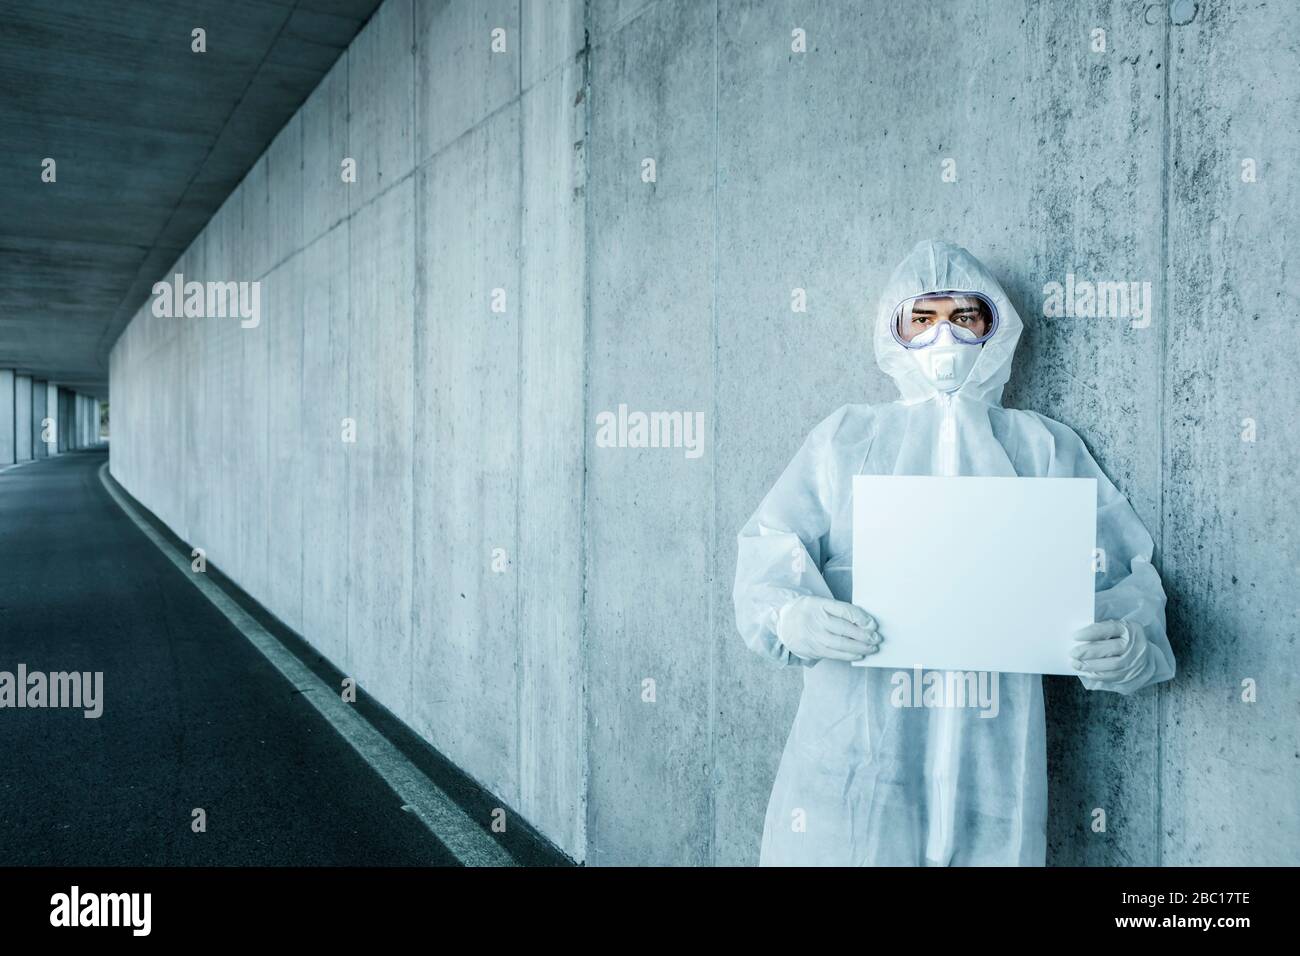 Portrait of man wearing protective clothing holding a blank sign Stock Photo